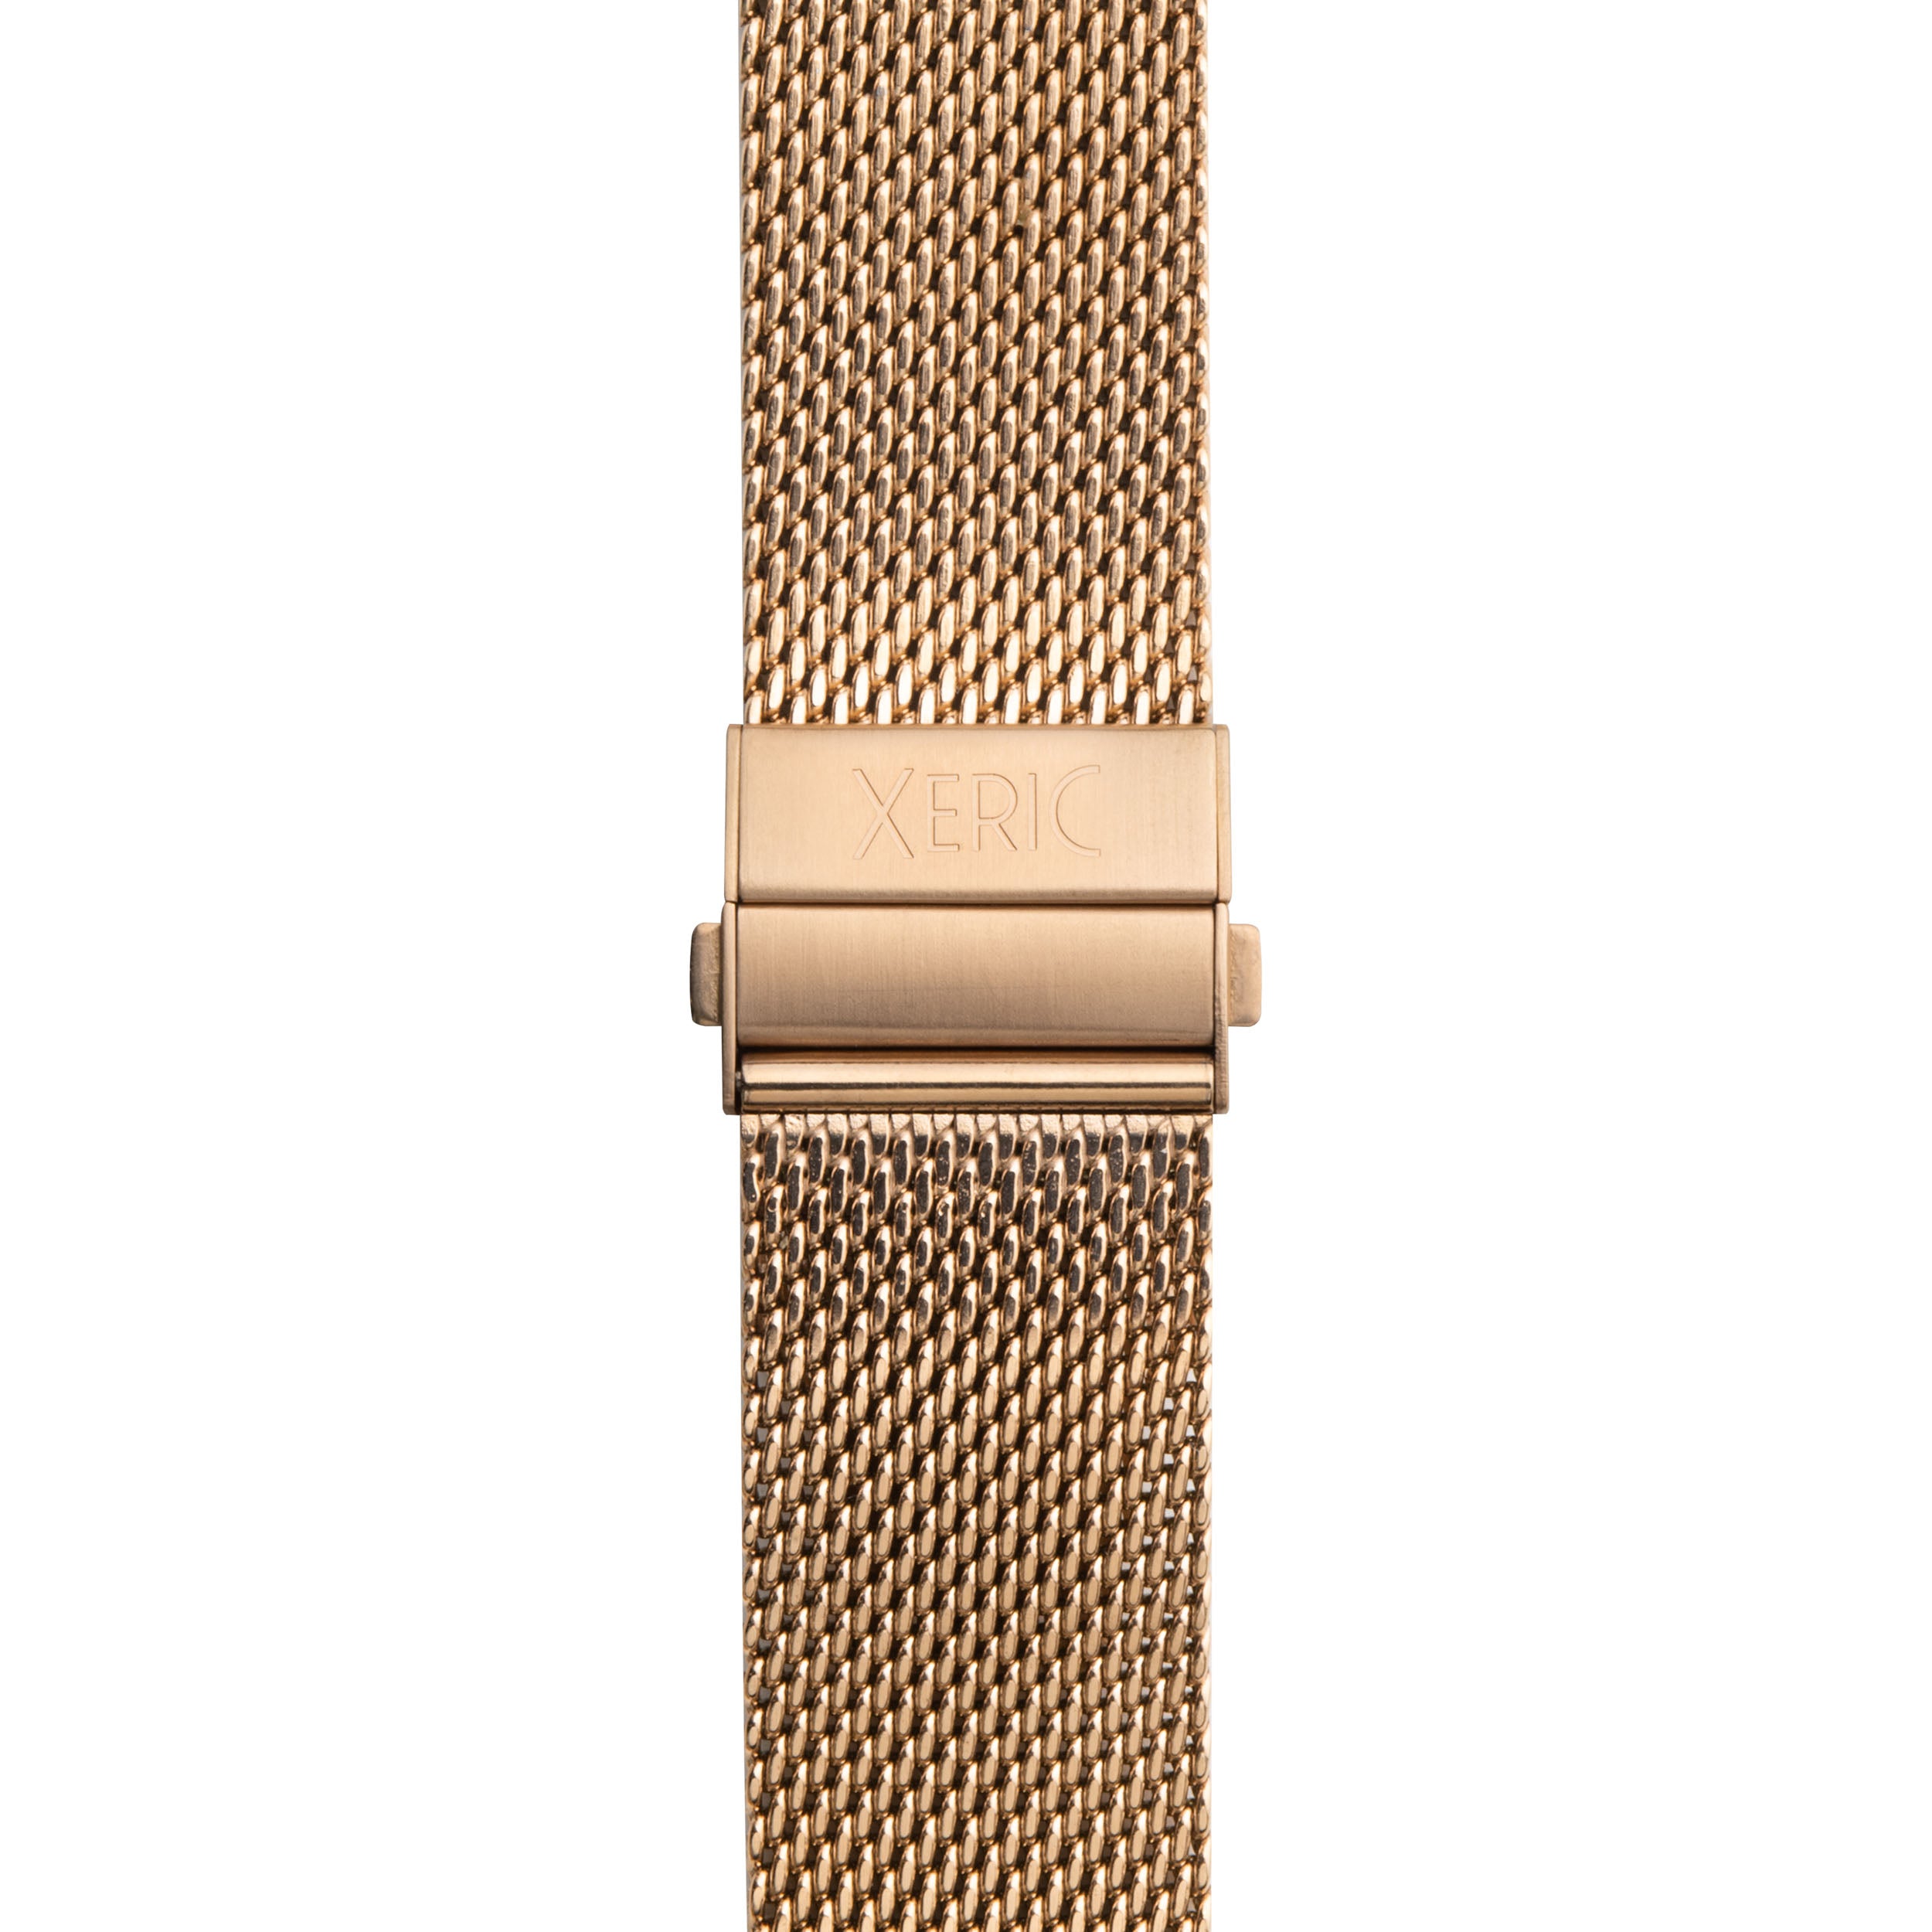 Betjening mulig bogstaveligt talt Glorious Xeric 20mm Rose Gold PVD Mesh Bracelet with Deployant Clasp | Watches.com